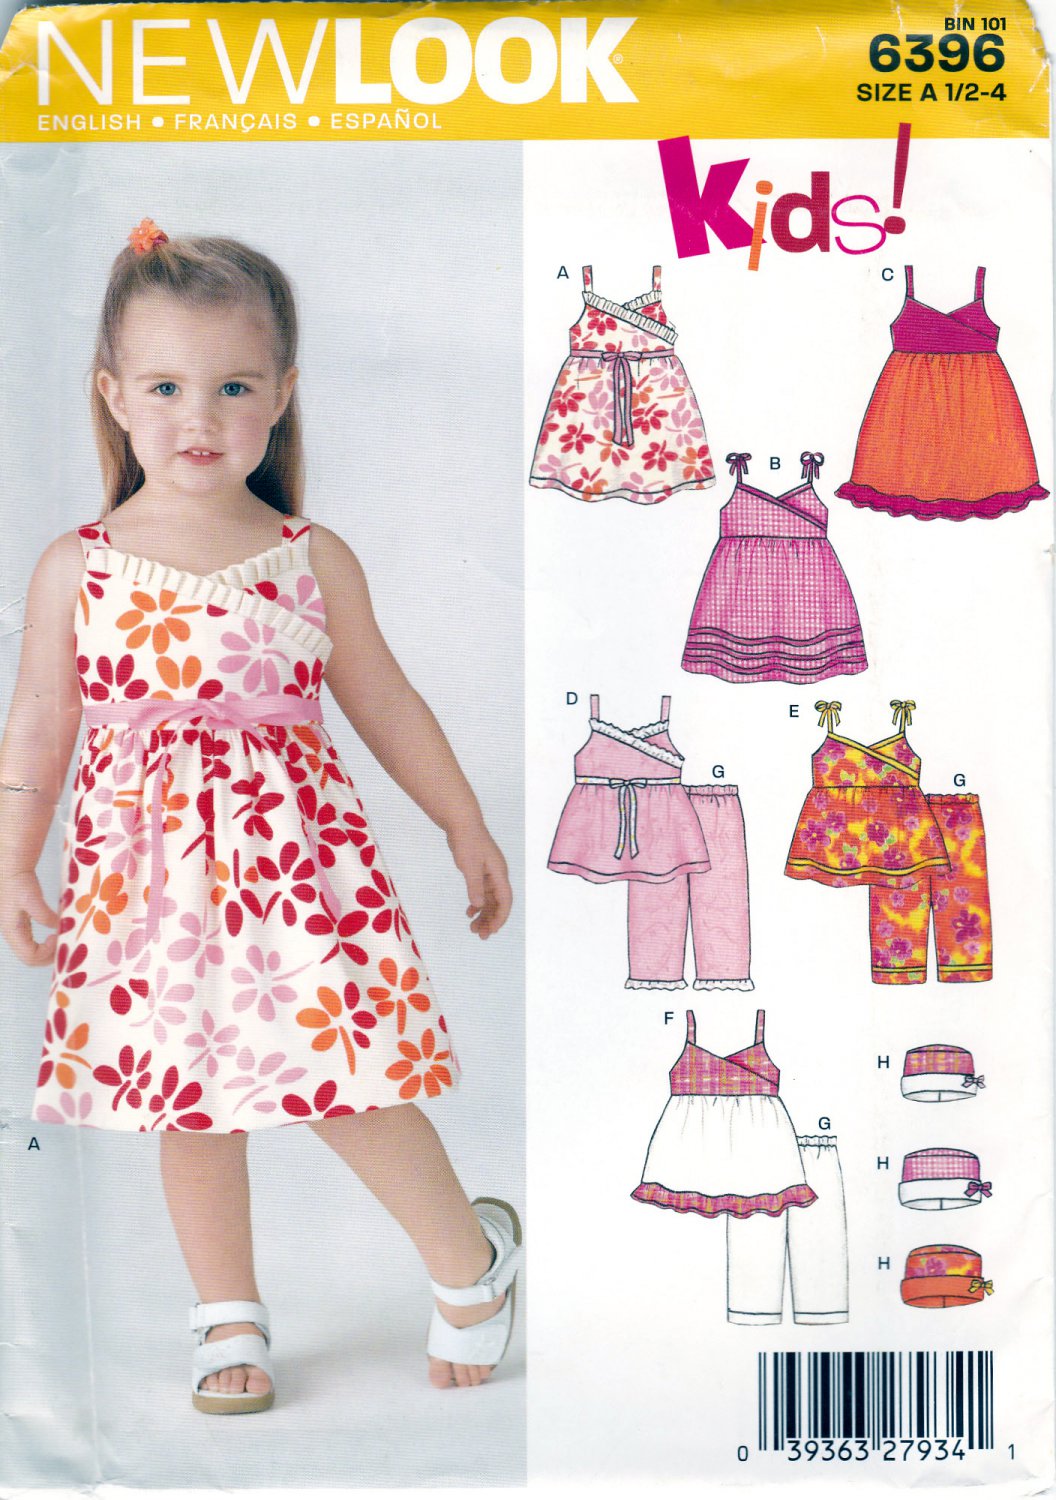 New Look 6396 Girls Toddlers Sewing Pattern Childrens 5 Looks Dress Pants Top Hat Kids Sizes 1/2 - 4